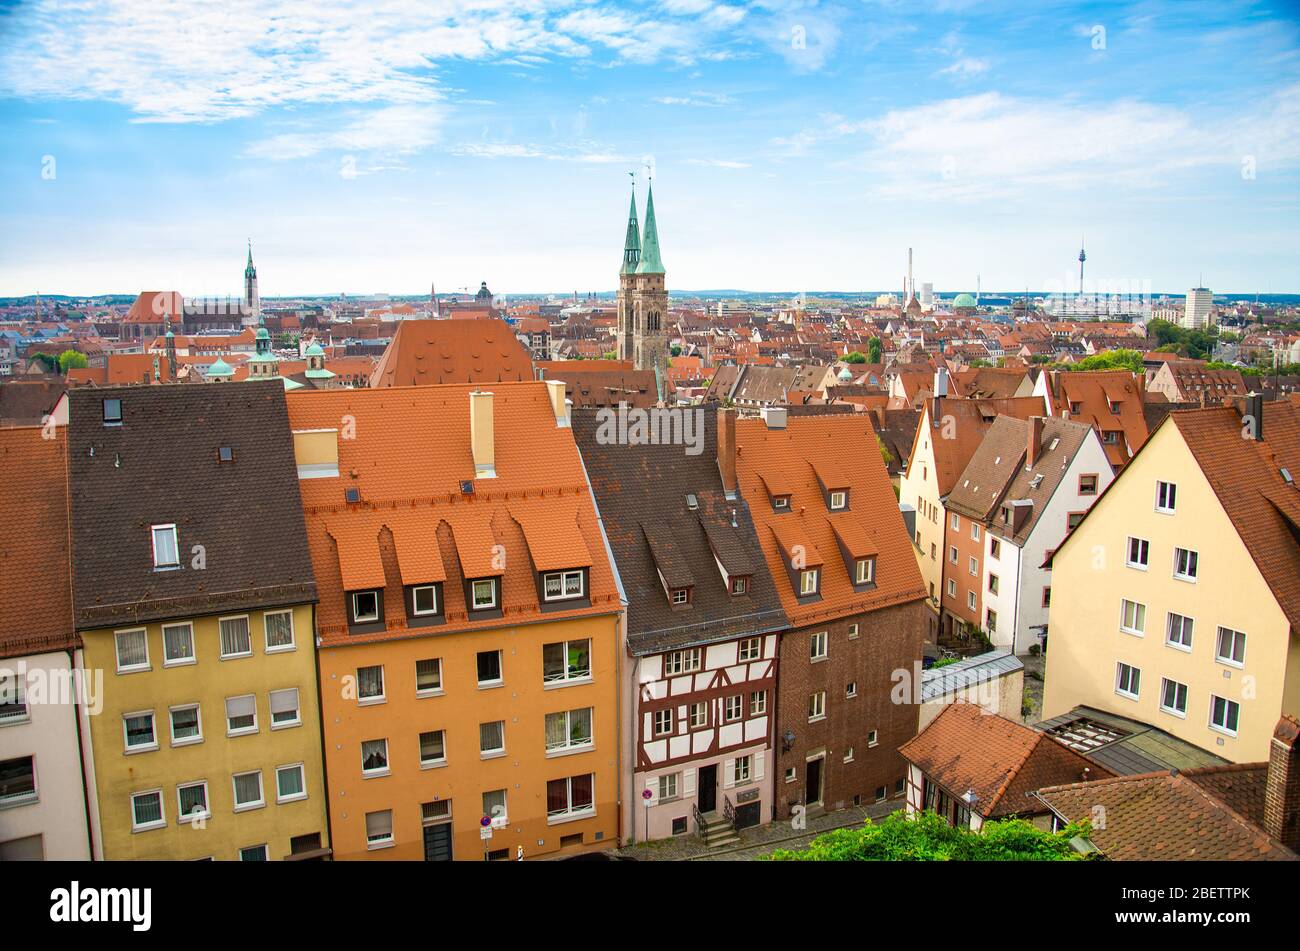 Panoramic view with roofs of the historic old city of Nuremberg Nurnberg, Mittelfranken region, Bavaria, Germany Stock Photo